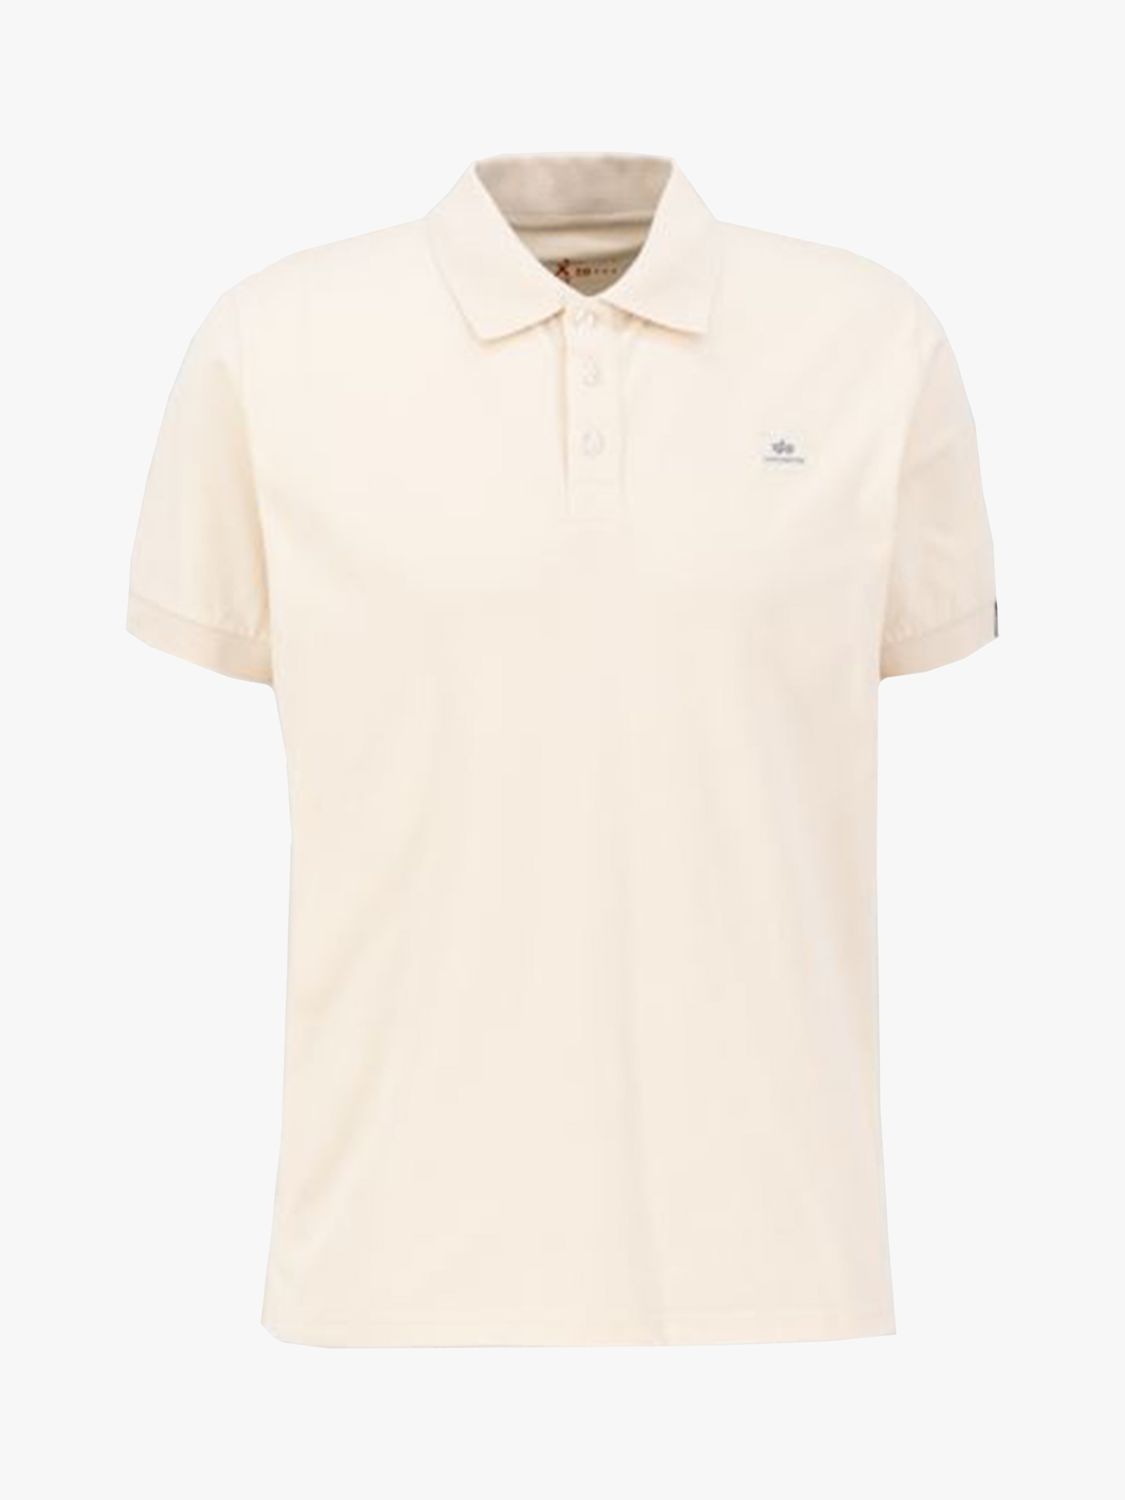 Alpha Industries X-Fit Polo Shirt, 578 Jet Stream White, S